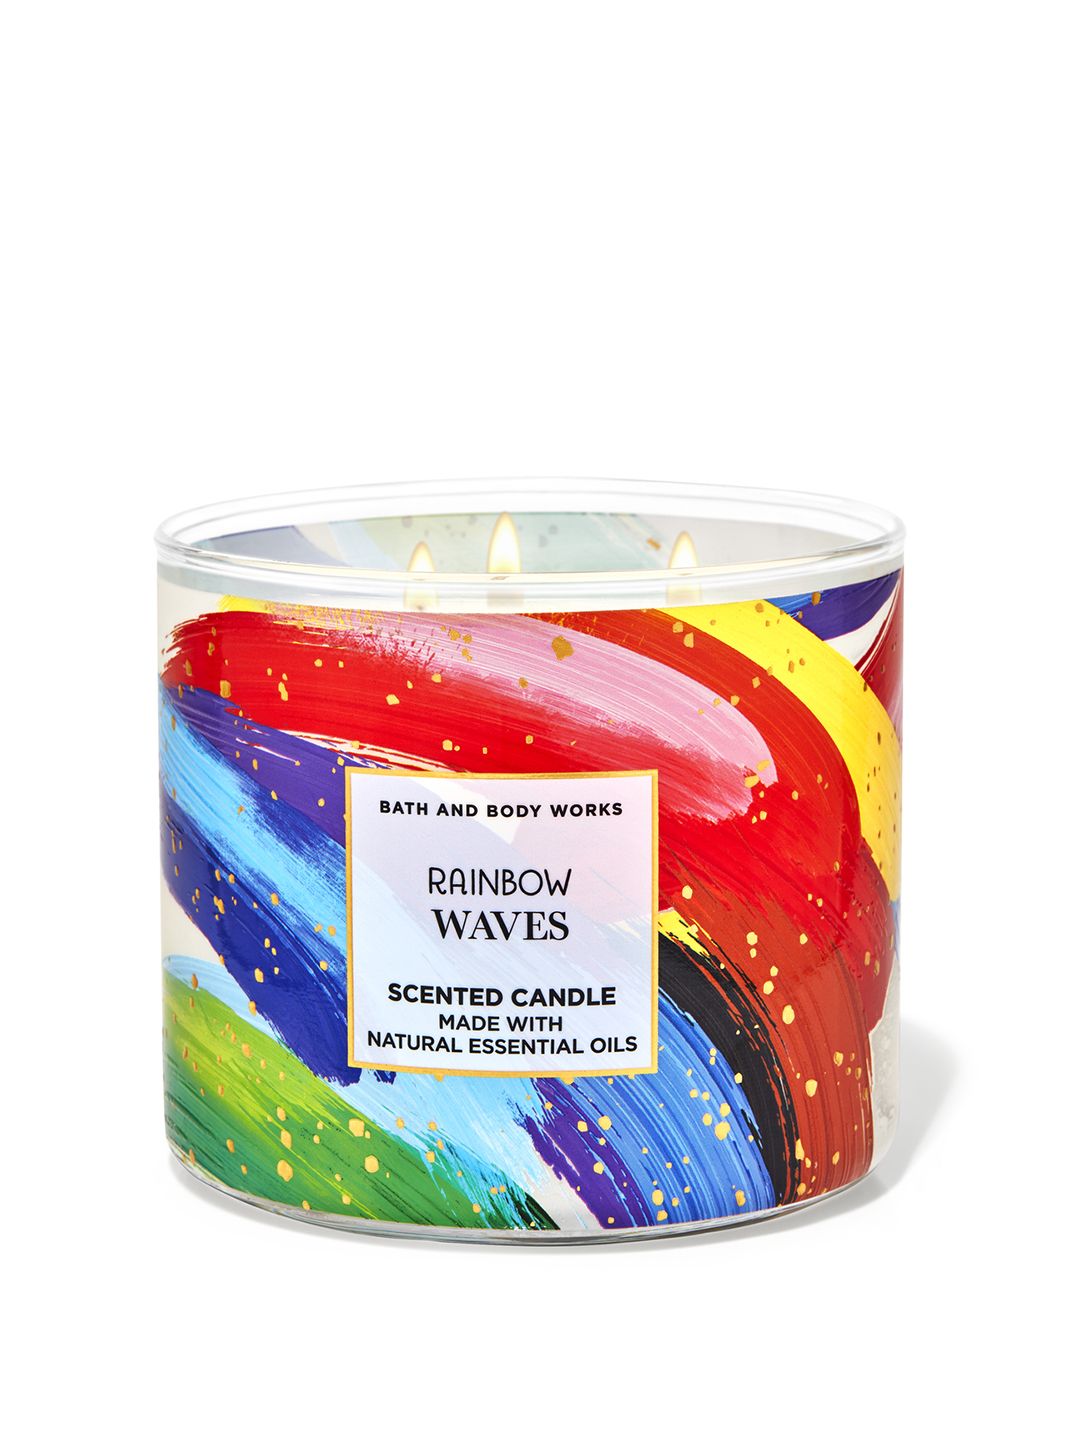 Bath & Body Works Rainbow Waves 3-Wick Scented Candle with Essential Oils - 411g Price in India